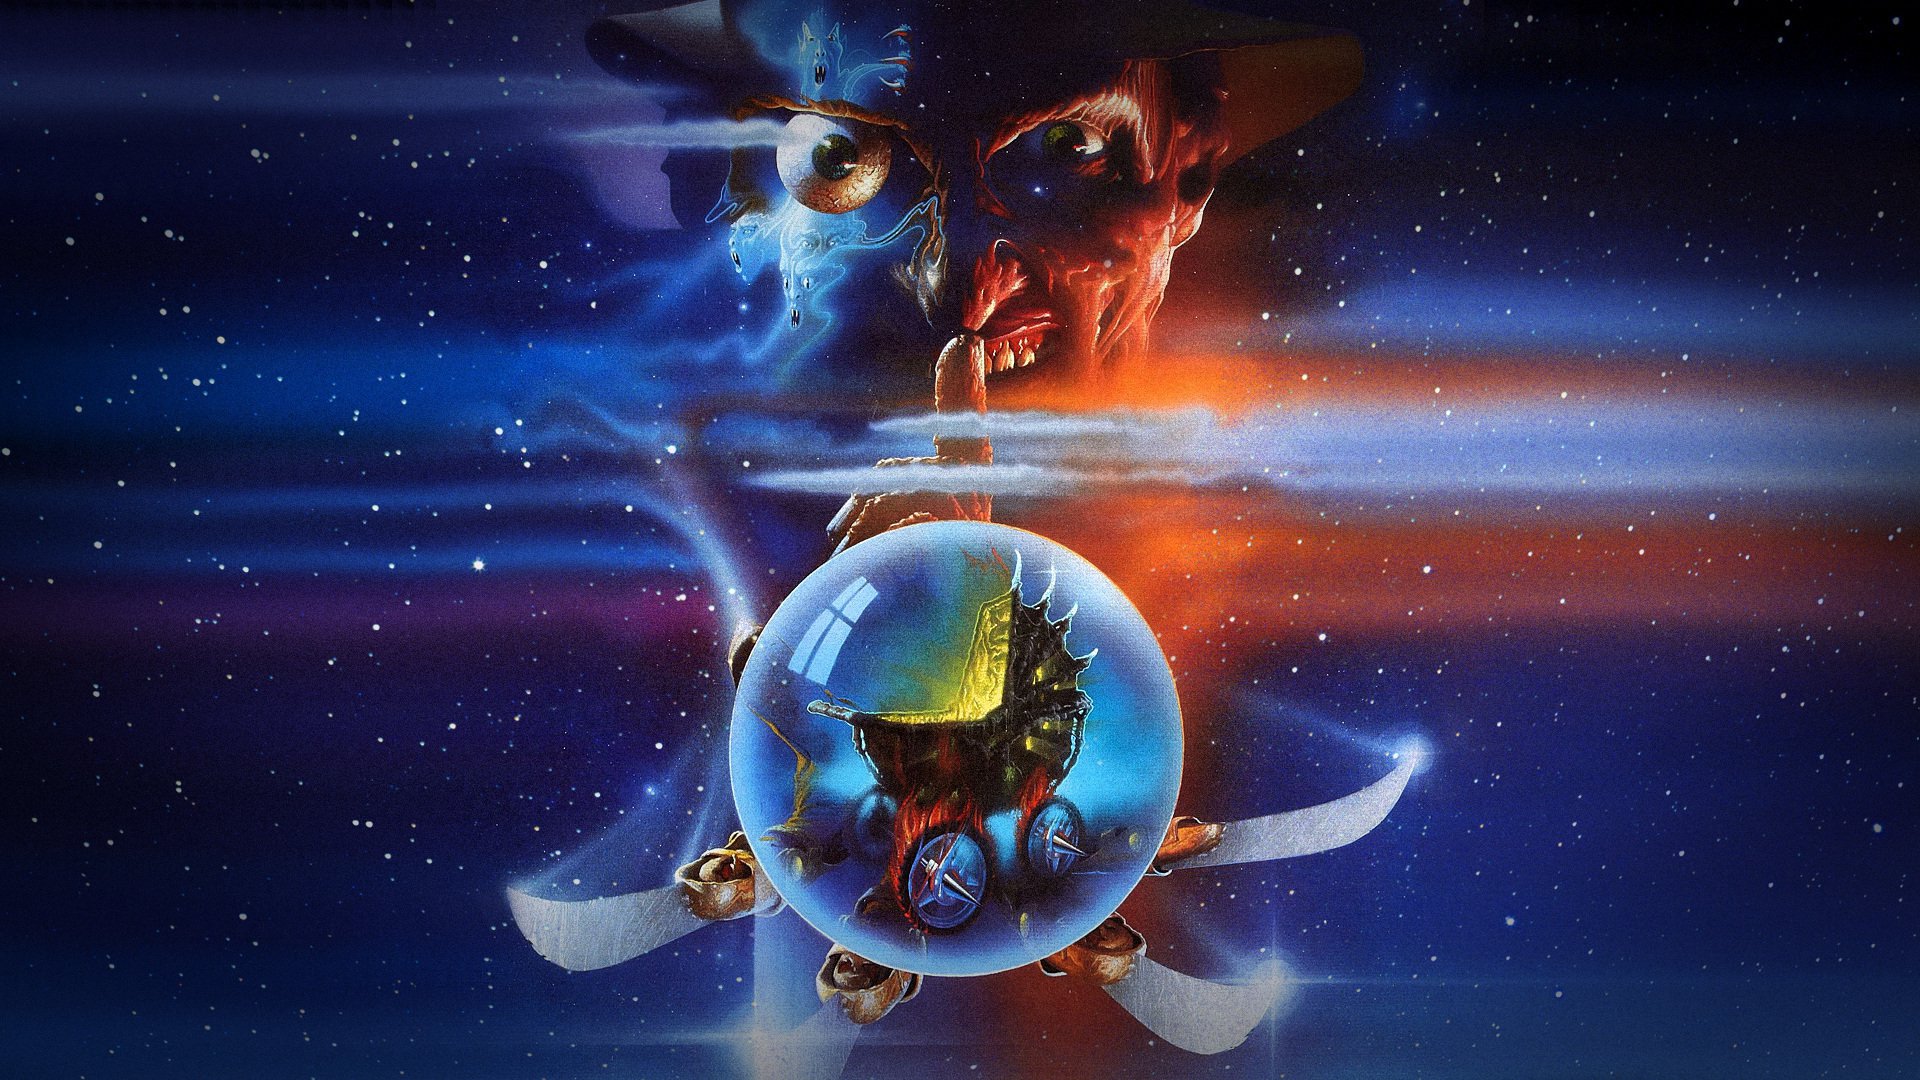 nightmare on elm street wallpaper,outer space,space,sky,atmosphere,graphic design